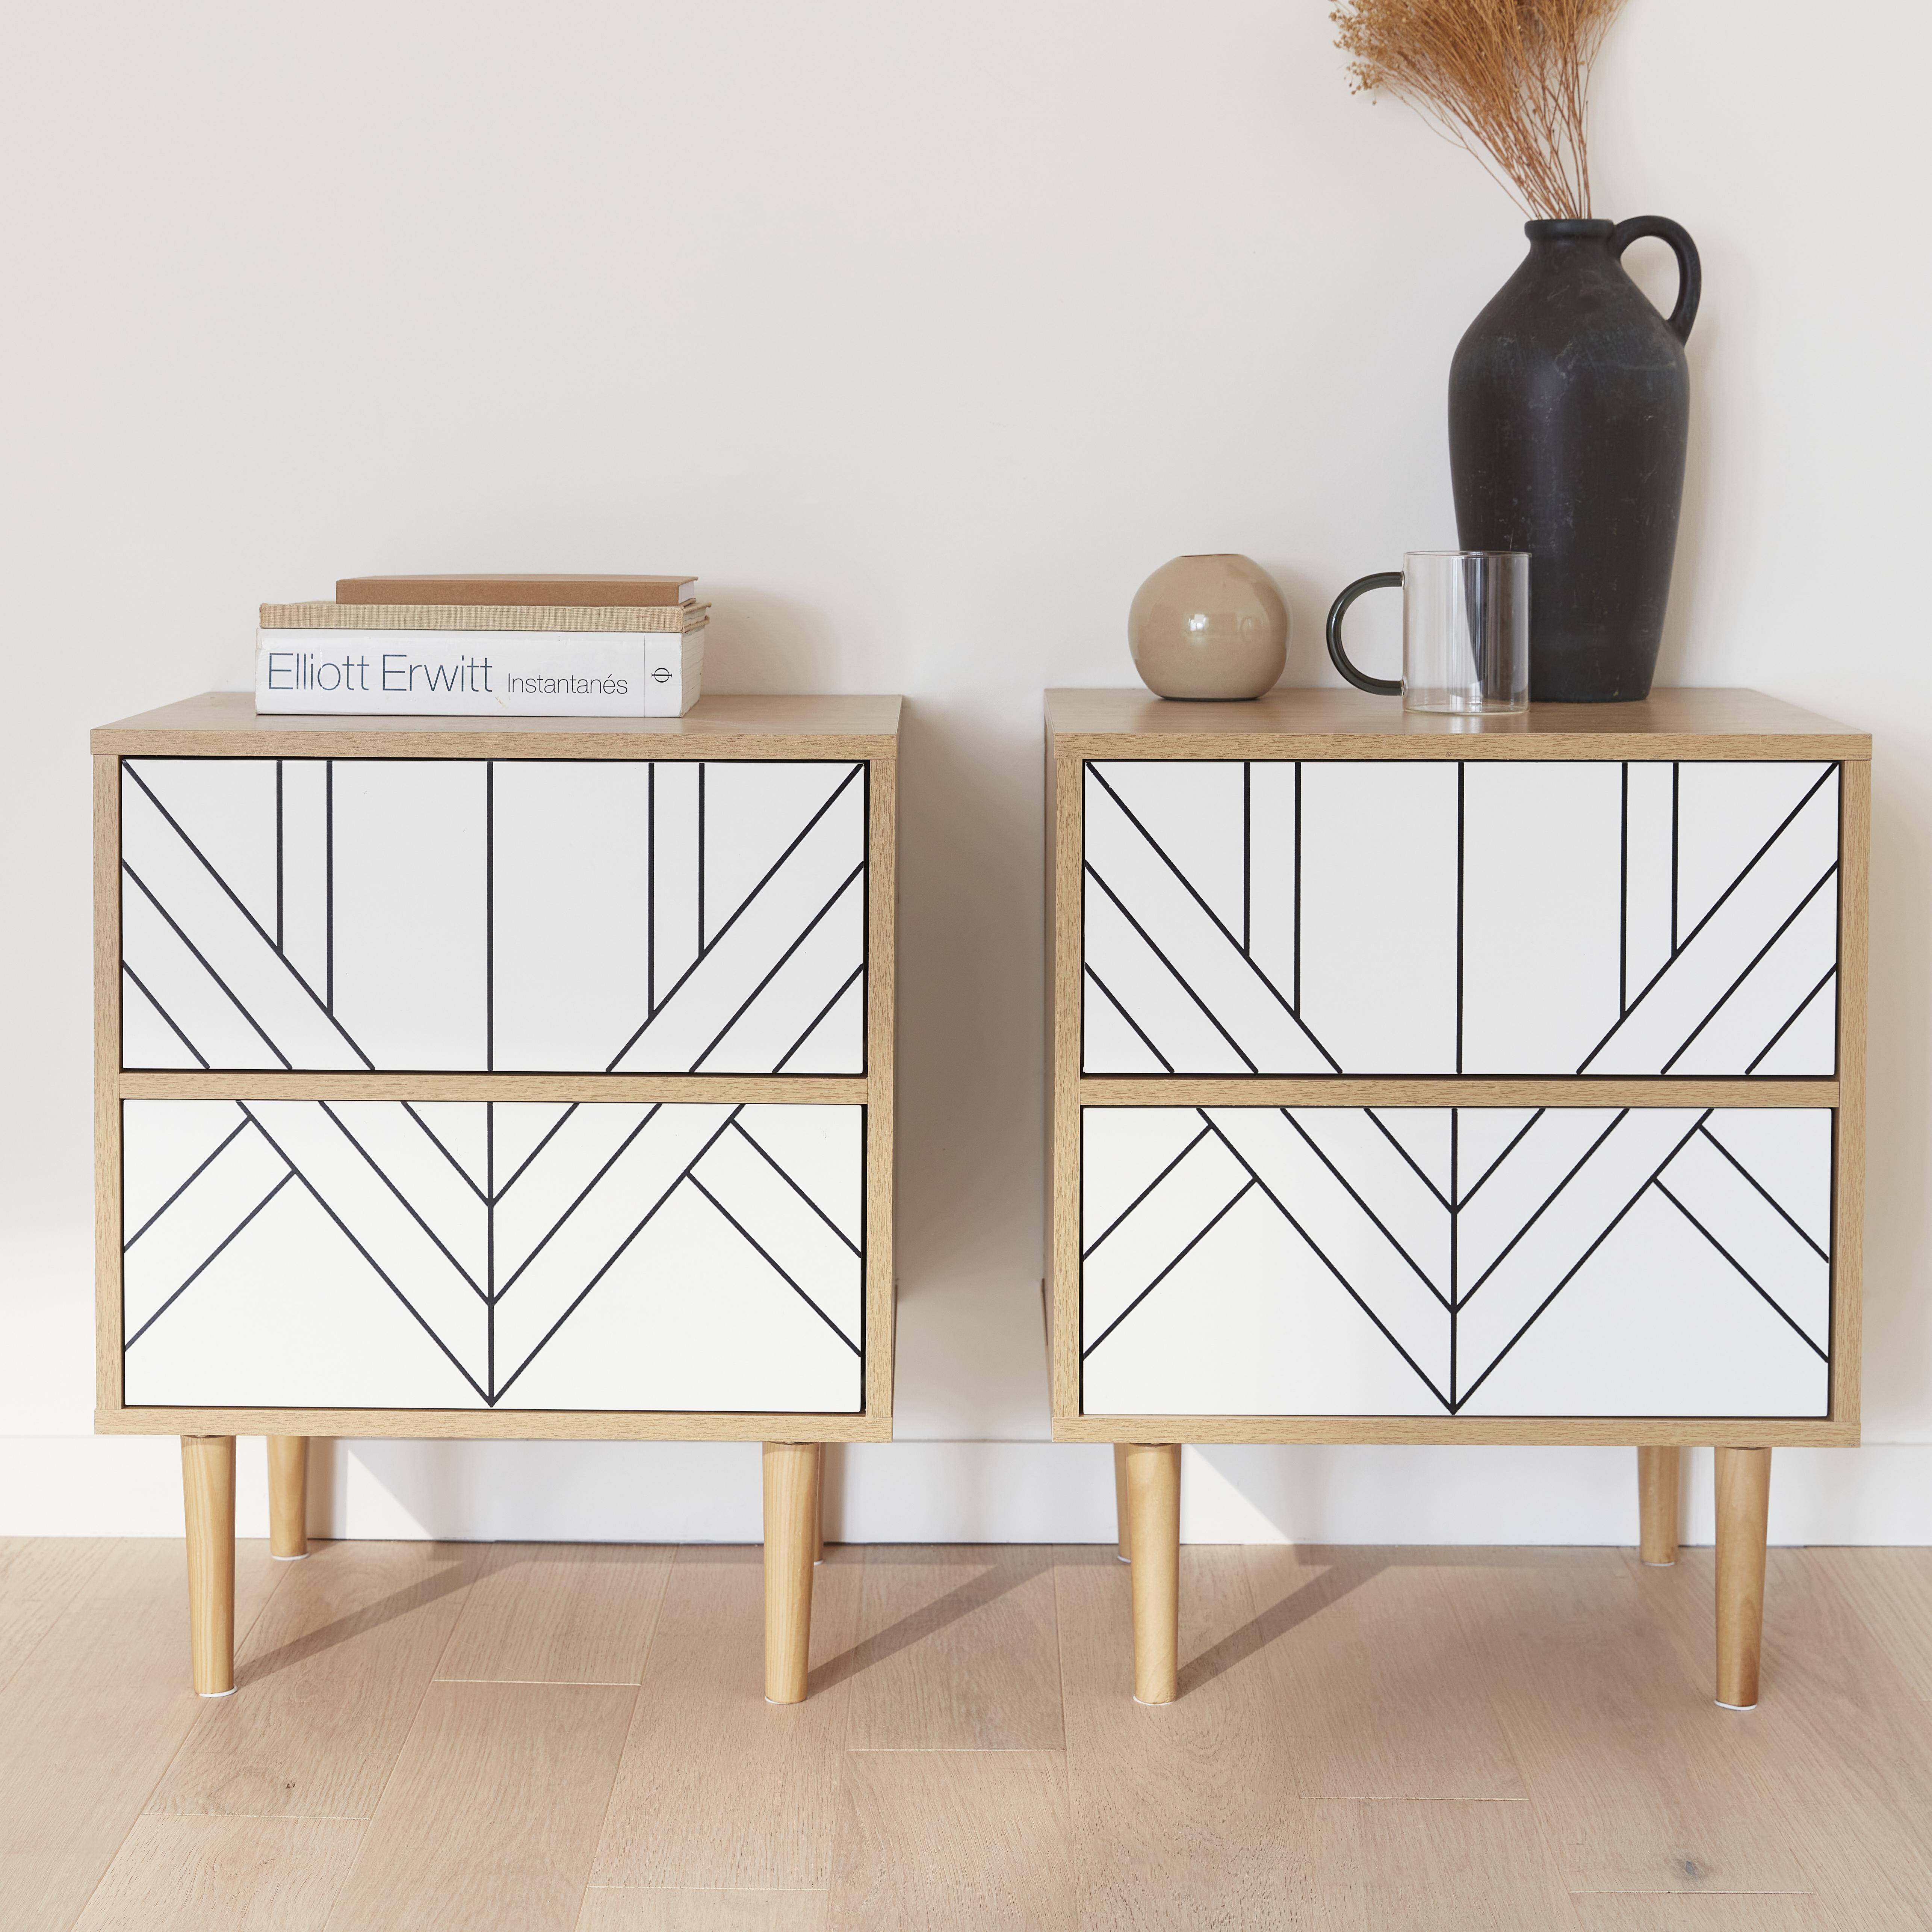 Pair of wood-effect bedside tables with two drawers, 48x40x59cm - Mika - White Photo1